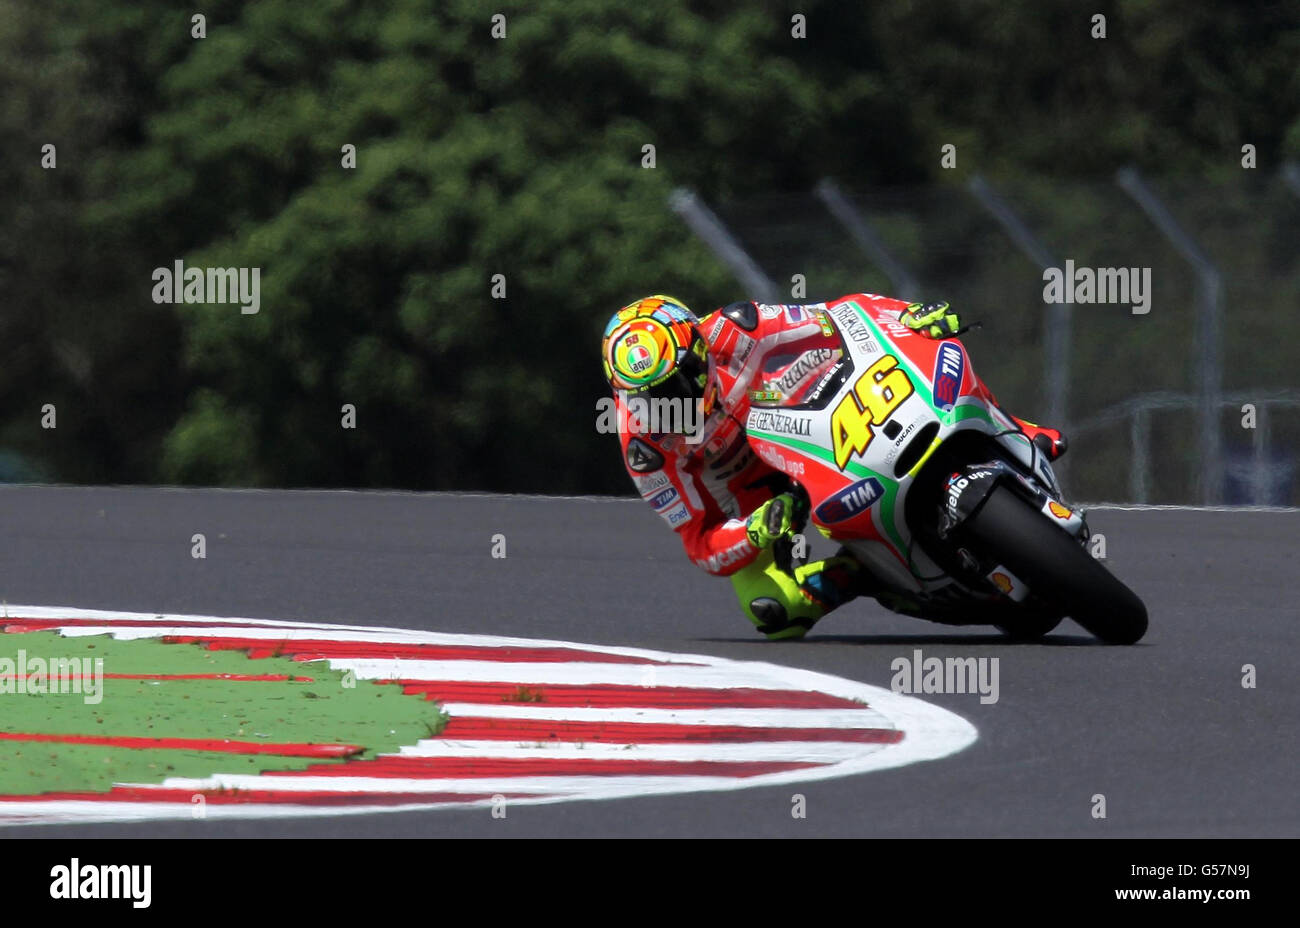 Motorcycling - 2012 Hertz British Grand Prix - Day One - Moto GP - Silverstone. Italy's Valentino Rossi on the Duacti during practice of the British Moto Grand Prix during day one at Silverstone, Northamptonshire. Stock Photo